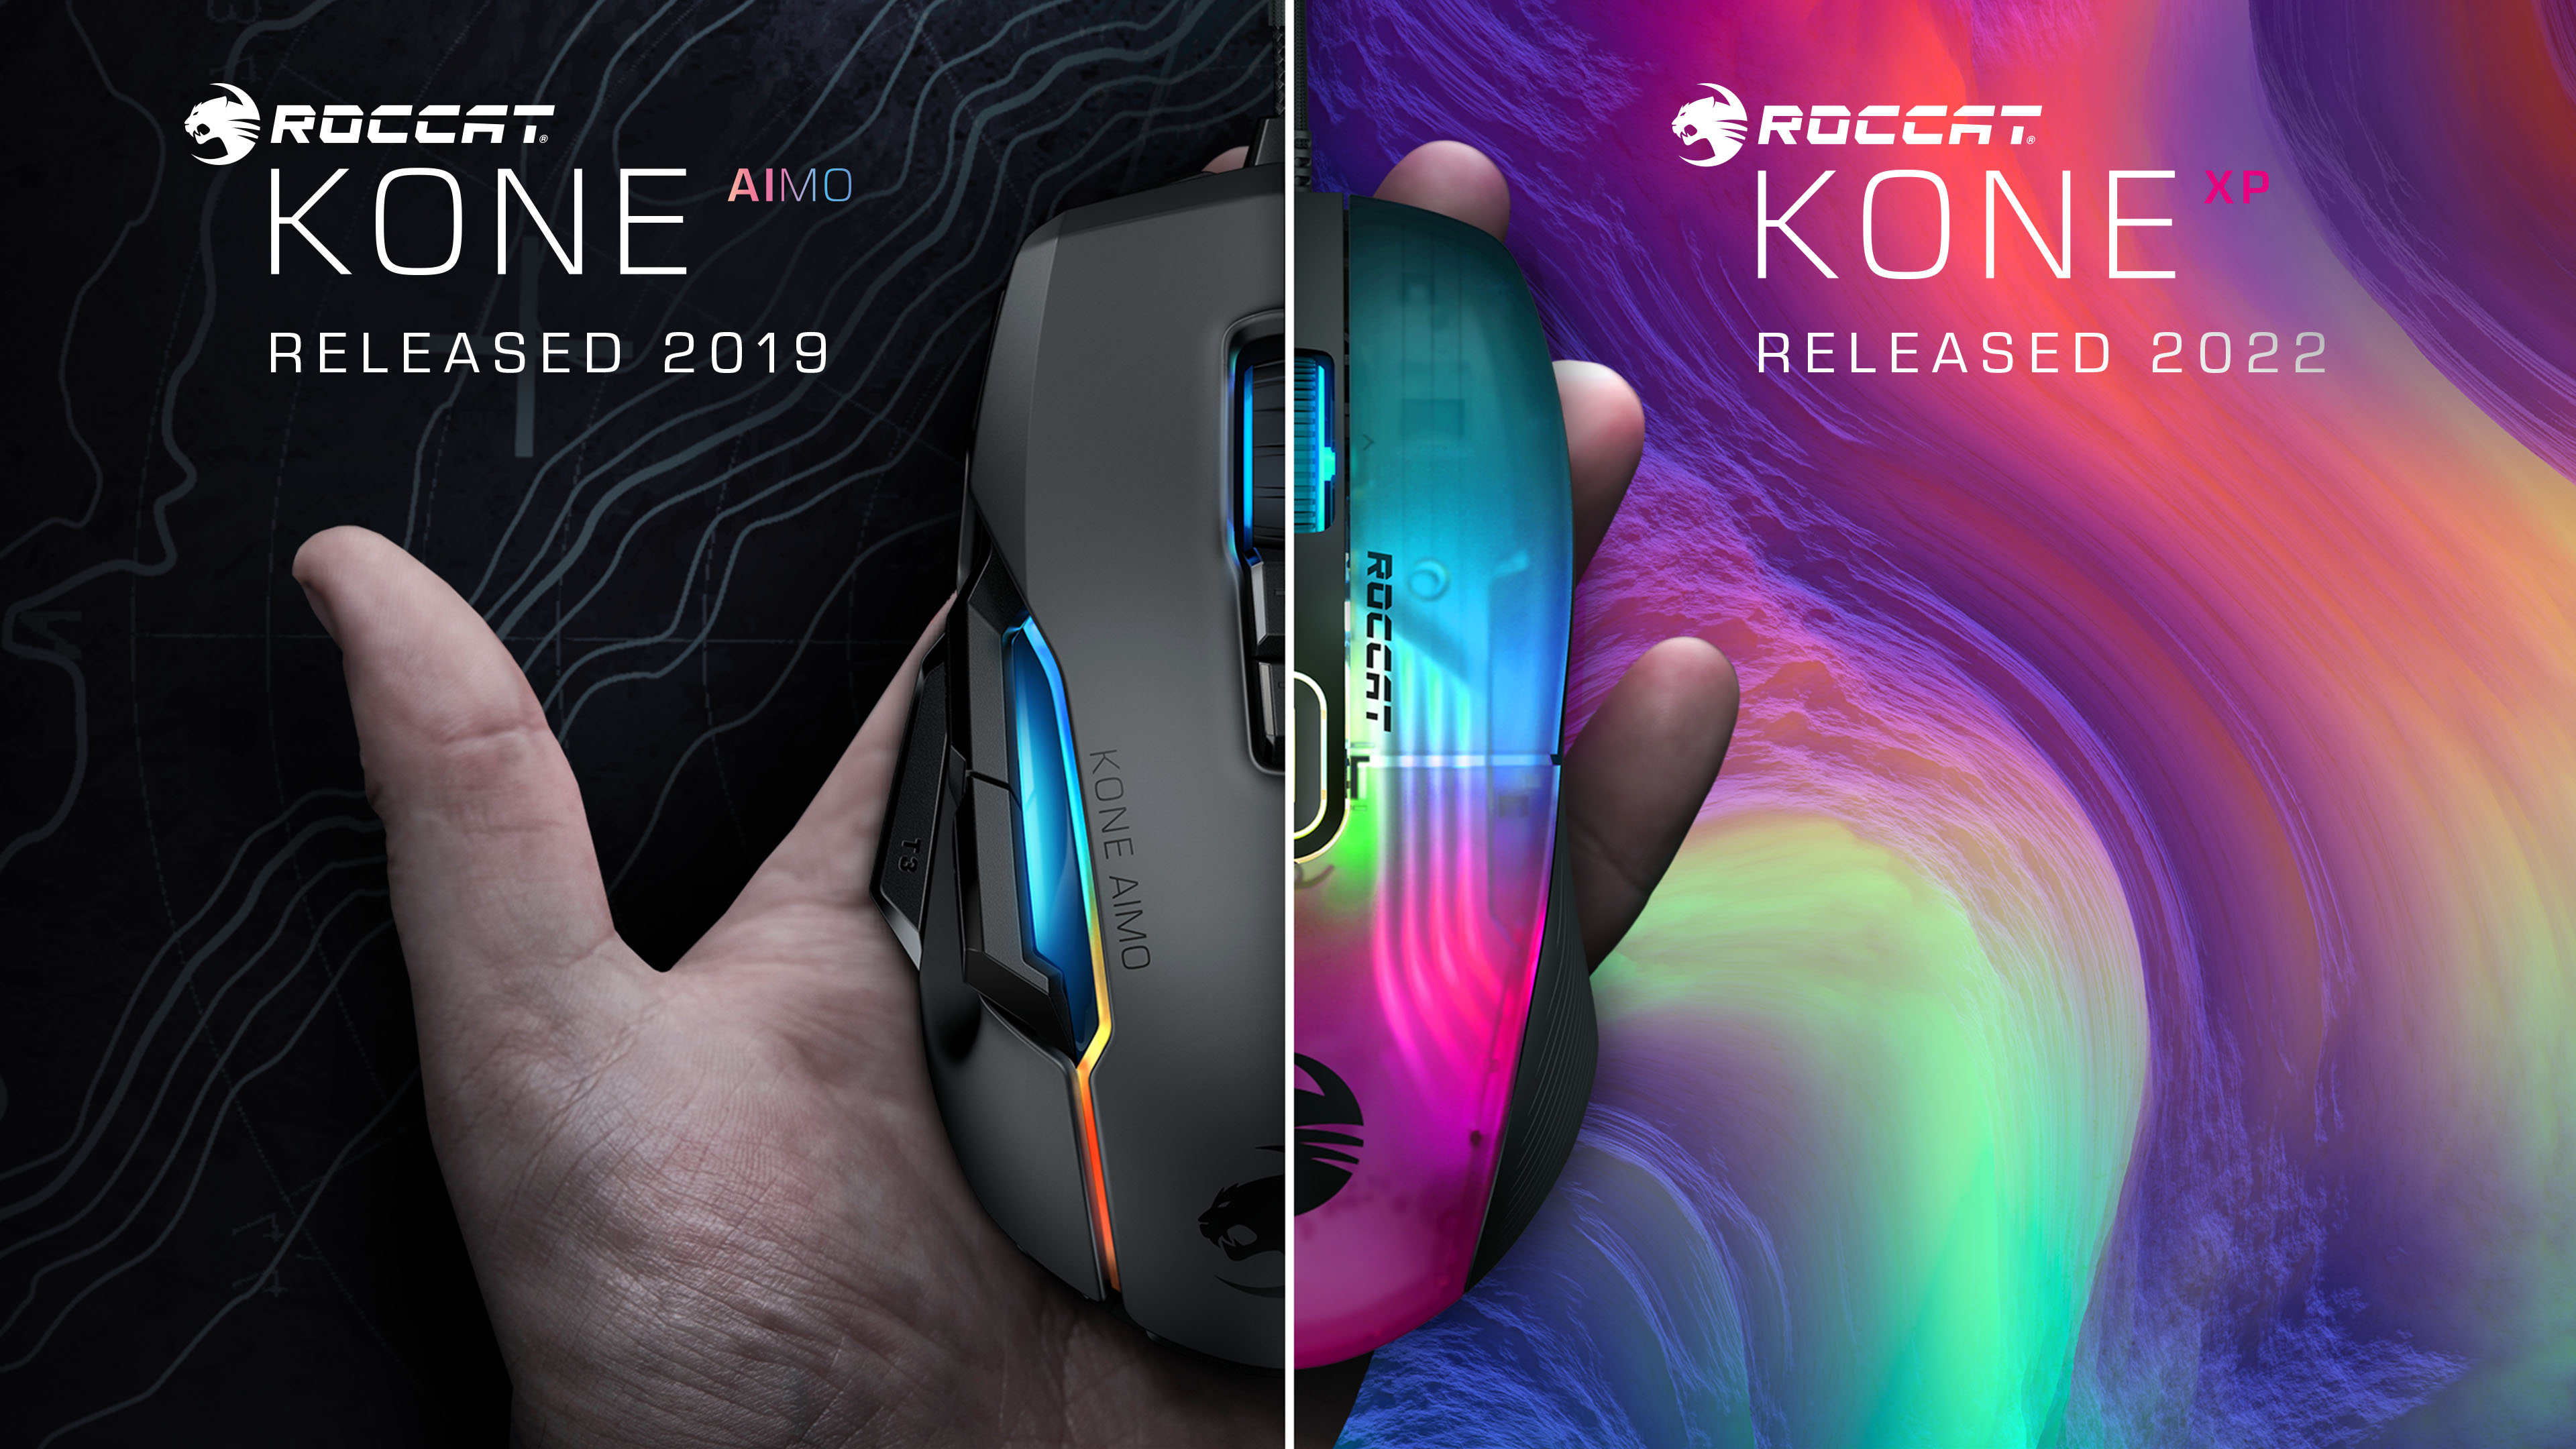 ROCCAT's All-New Kone XP Refines the Brand's Fan-Favorite Ergonomic Mouse  Design With Top Specs & Stunning 3D RGB Lighting | Business Wire